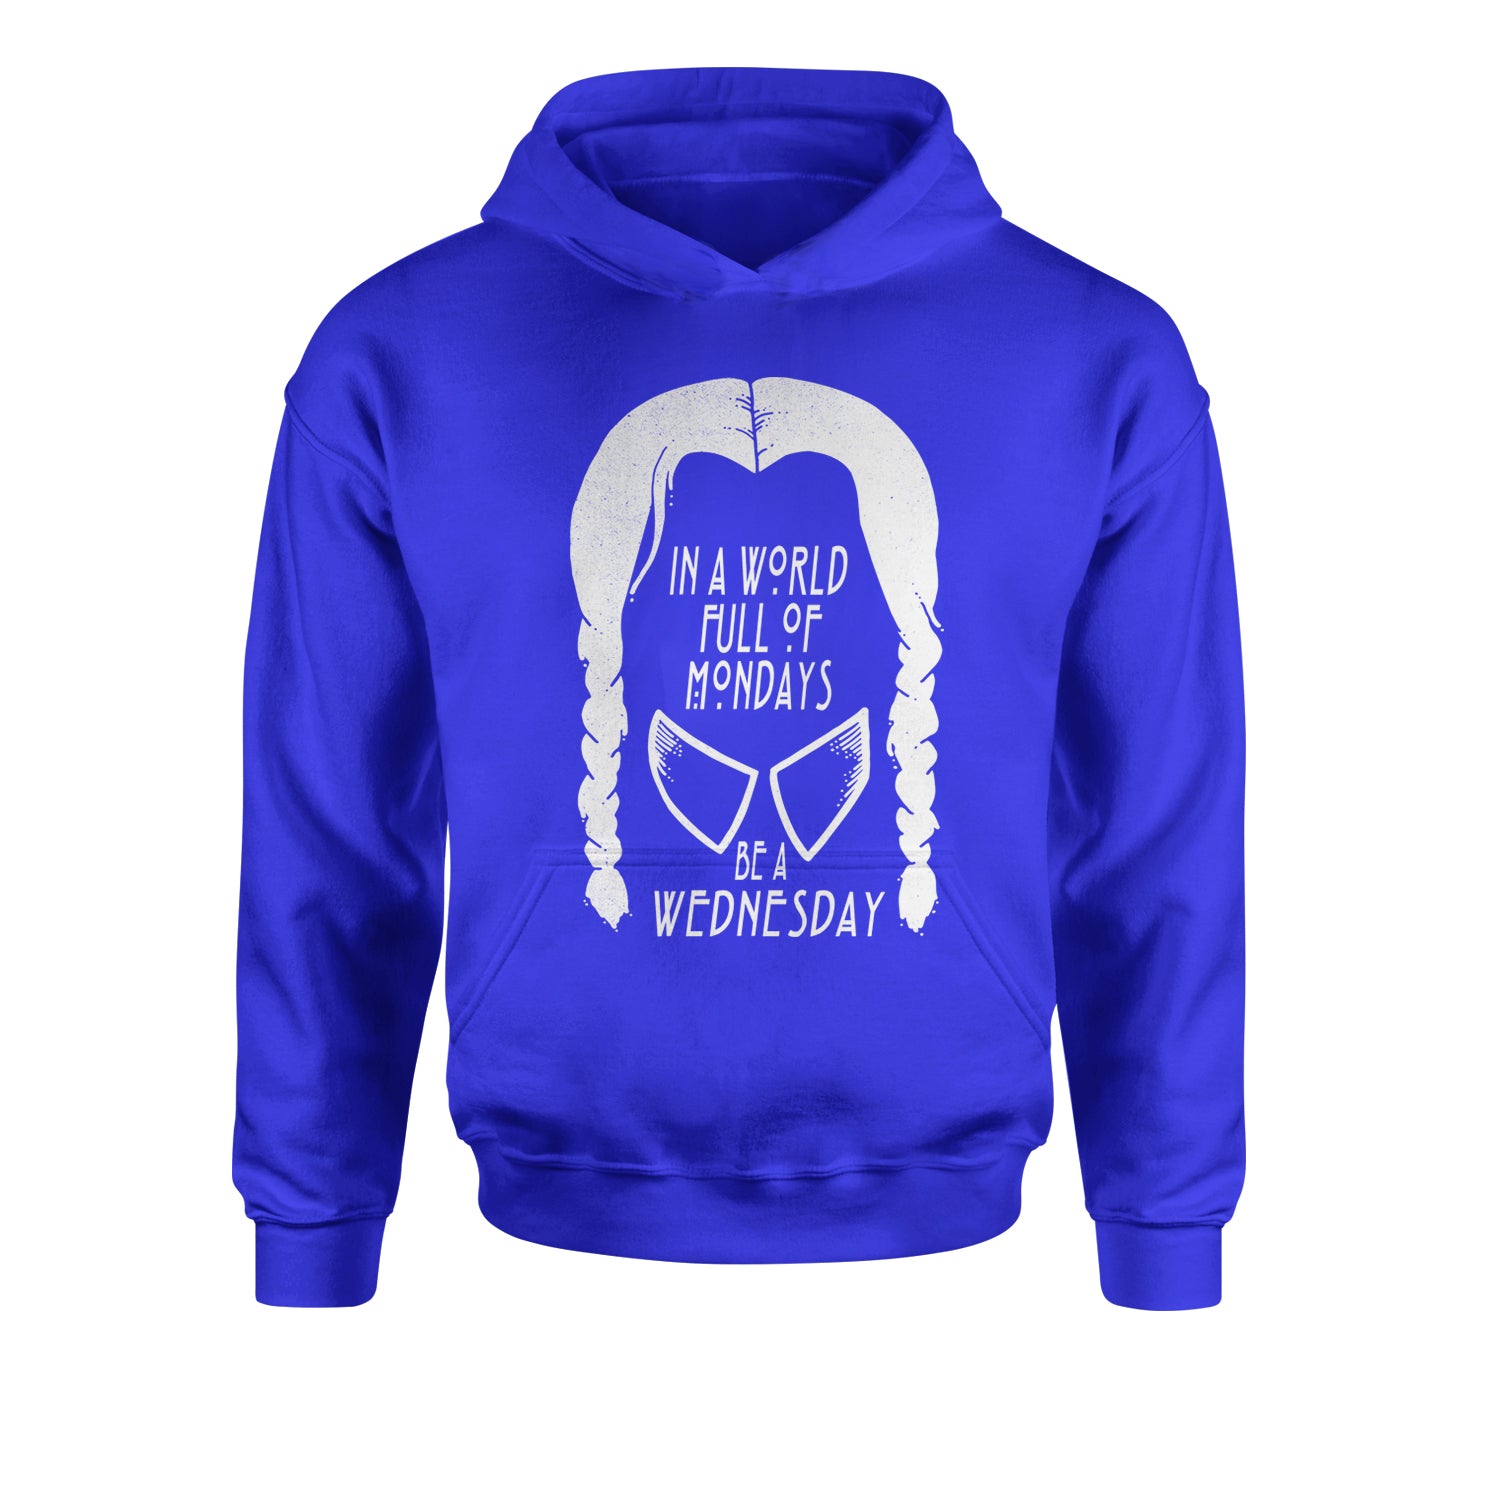 In A World Full Of Mondays, Be A Wednesday Youth-Sized Hoodie academy, jericho, more, never, nevermore, vermont, Wednesday by Expression Tees